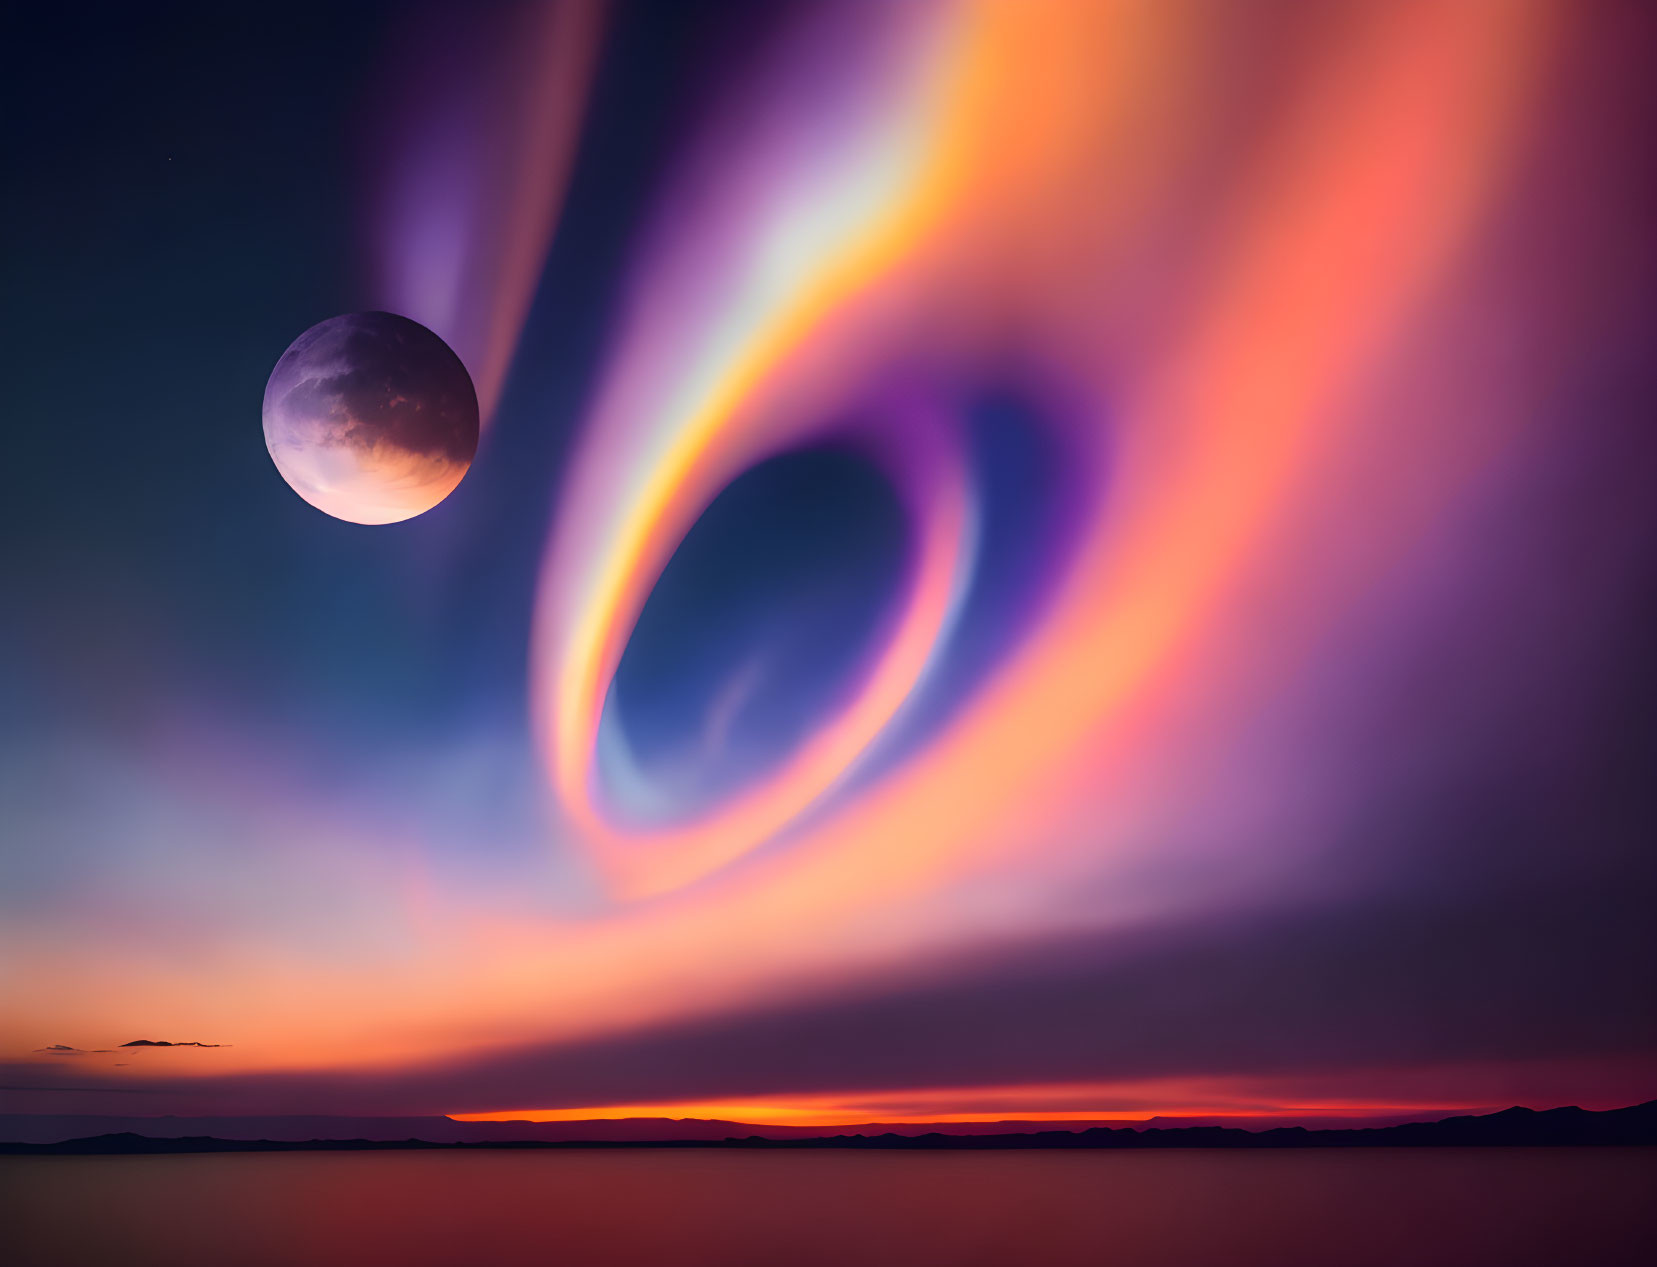 Vibrantly colored sky with swirling clouds and large moon above dark horizon